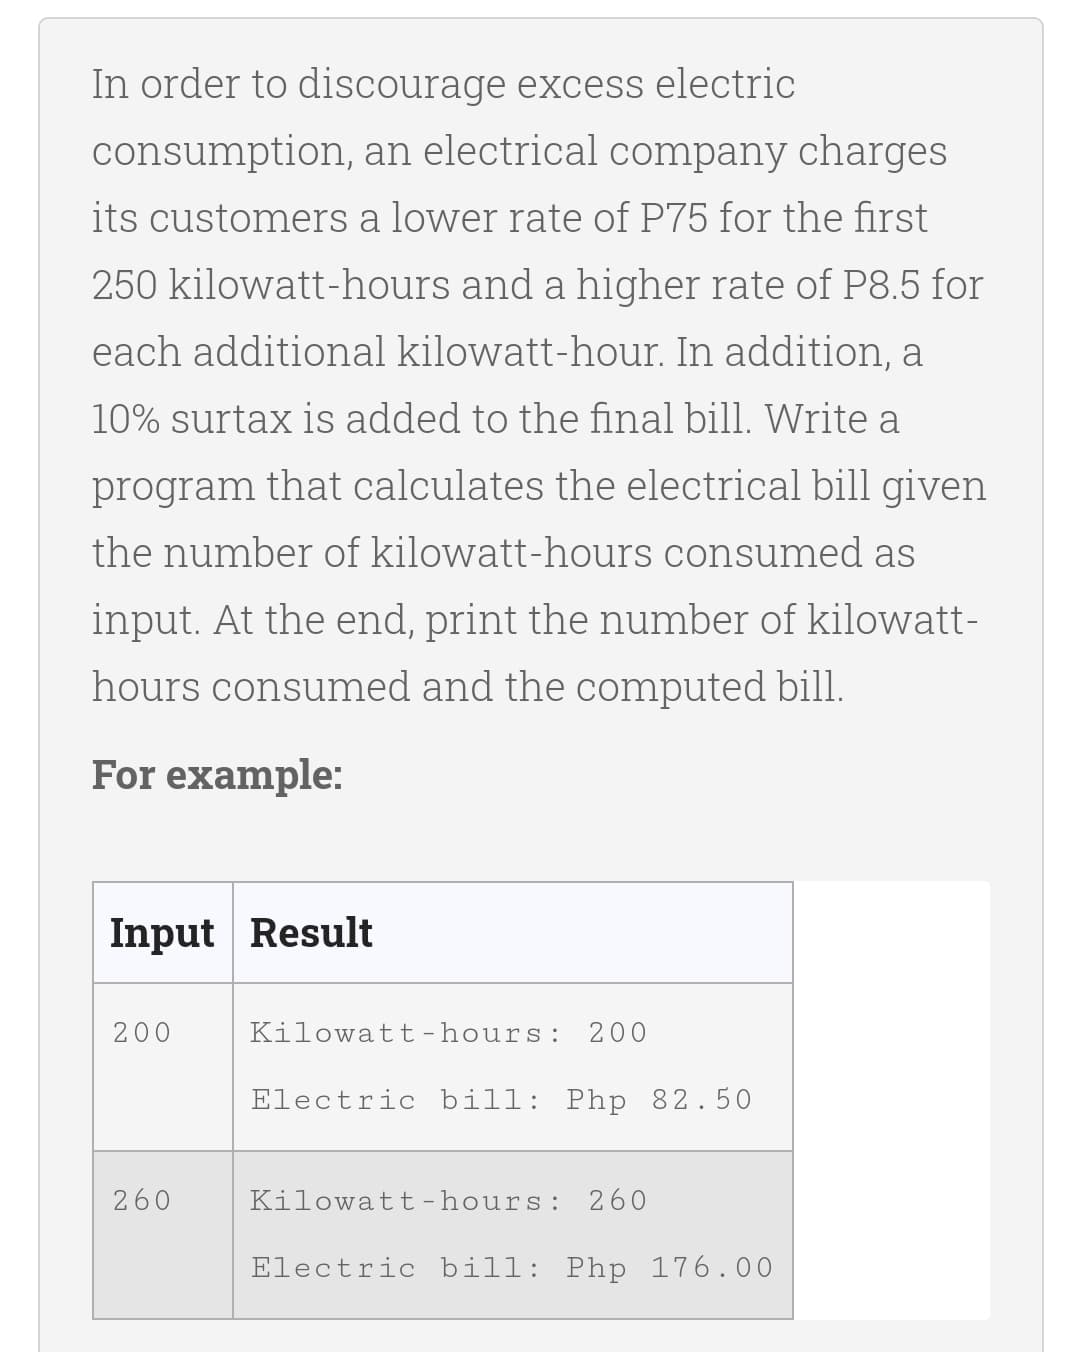 In order to discourage excess electric
consumption, an electrical company charges
its customers a lower rate of P75 for the first
250 kilowatt-hours and a higher rate of P8.5 for
each additional kilowatt-hour. In addition, a
10% surtax is added to the final bill. Write a
program that calculates the electrical bill given
the number of kilowatt-hours consumed as
input. At the end, print the number of kilowatt-
hours consumed and the computed bill.
For example:
Input Result
200
Kilowatt -hours:
200
Electric bill: Php 82.50
260
Kilowatt-hours: 260
Electric bill: Php 176.00
